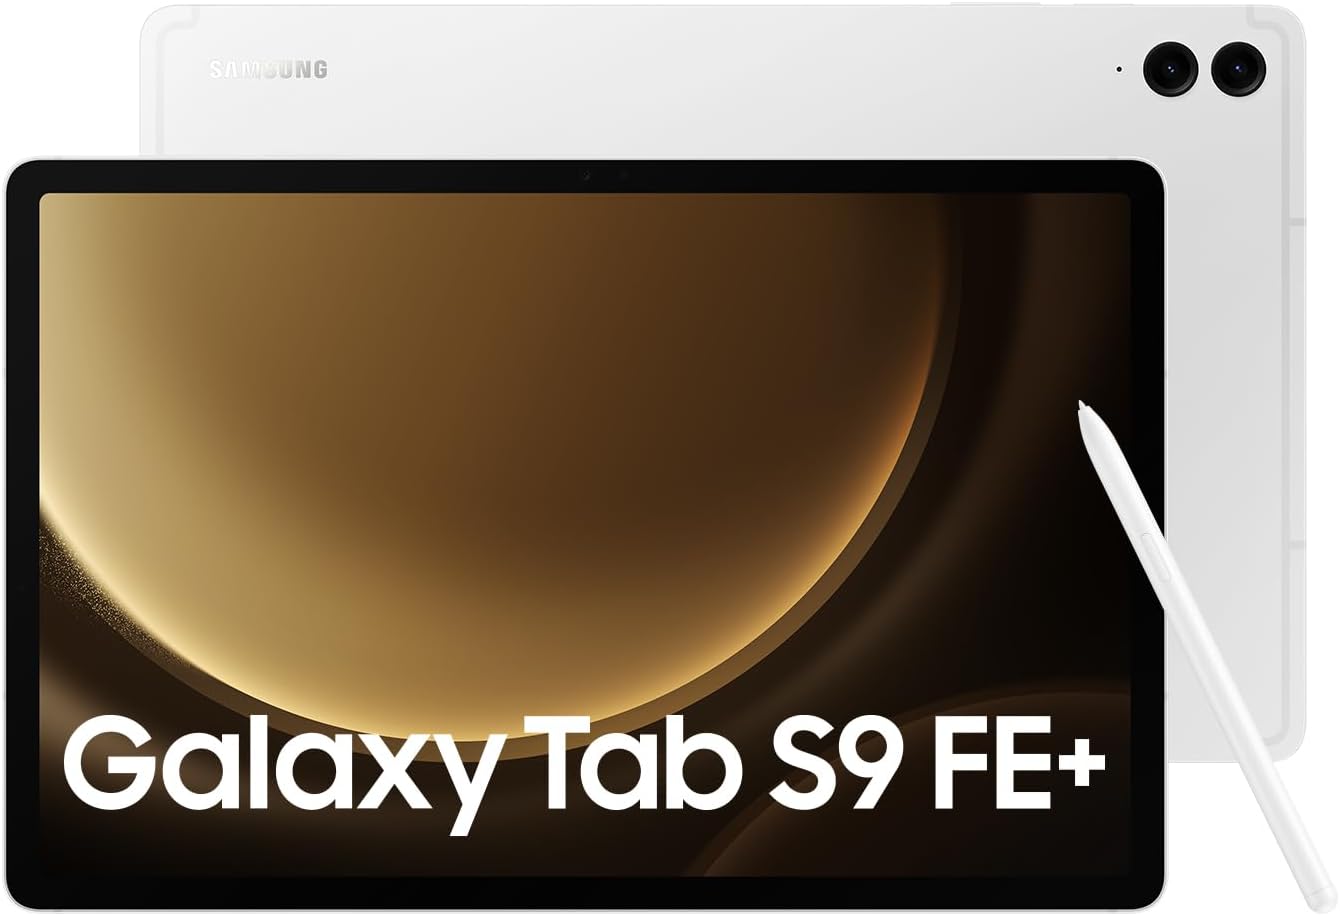 Samsung Galaxy Tab S9 FE+ in Silver - Enjoy vibrant entertainment on a big screen with Vision Booster for clear views outdoors. 8806095158976